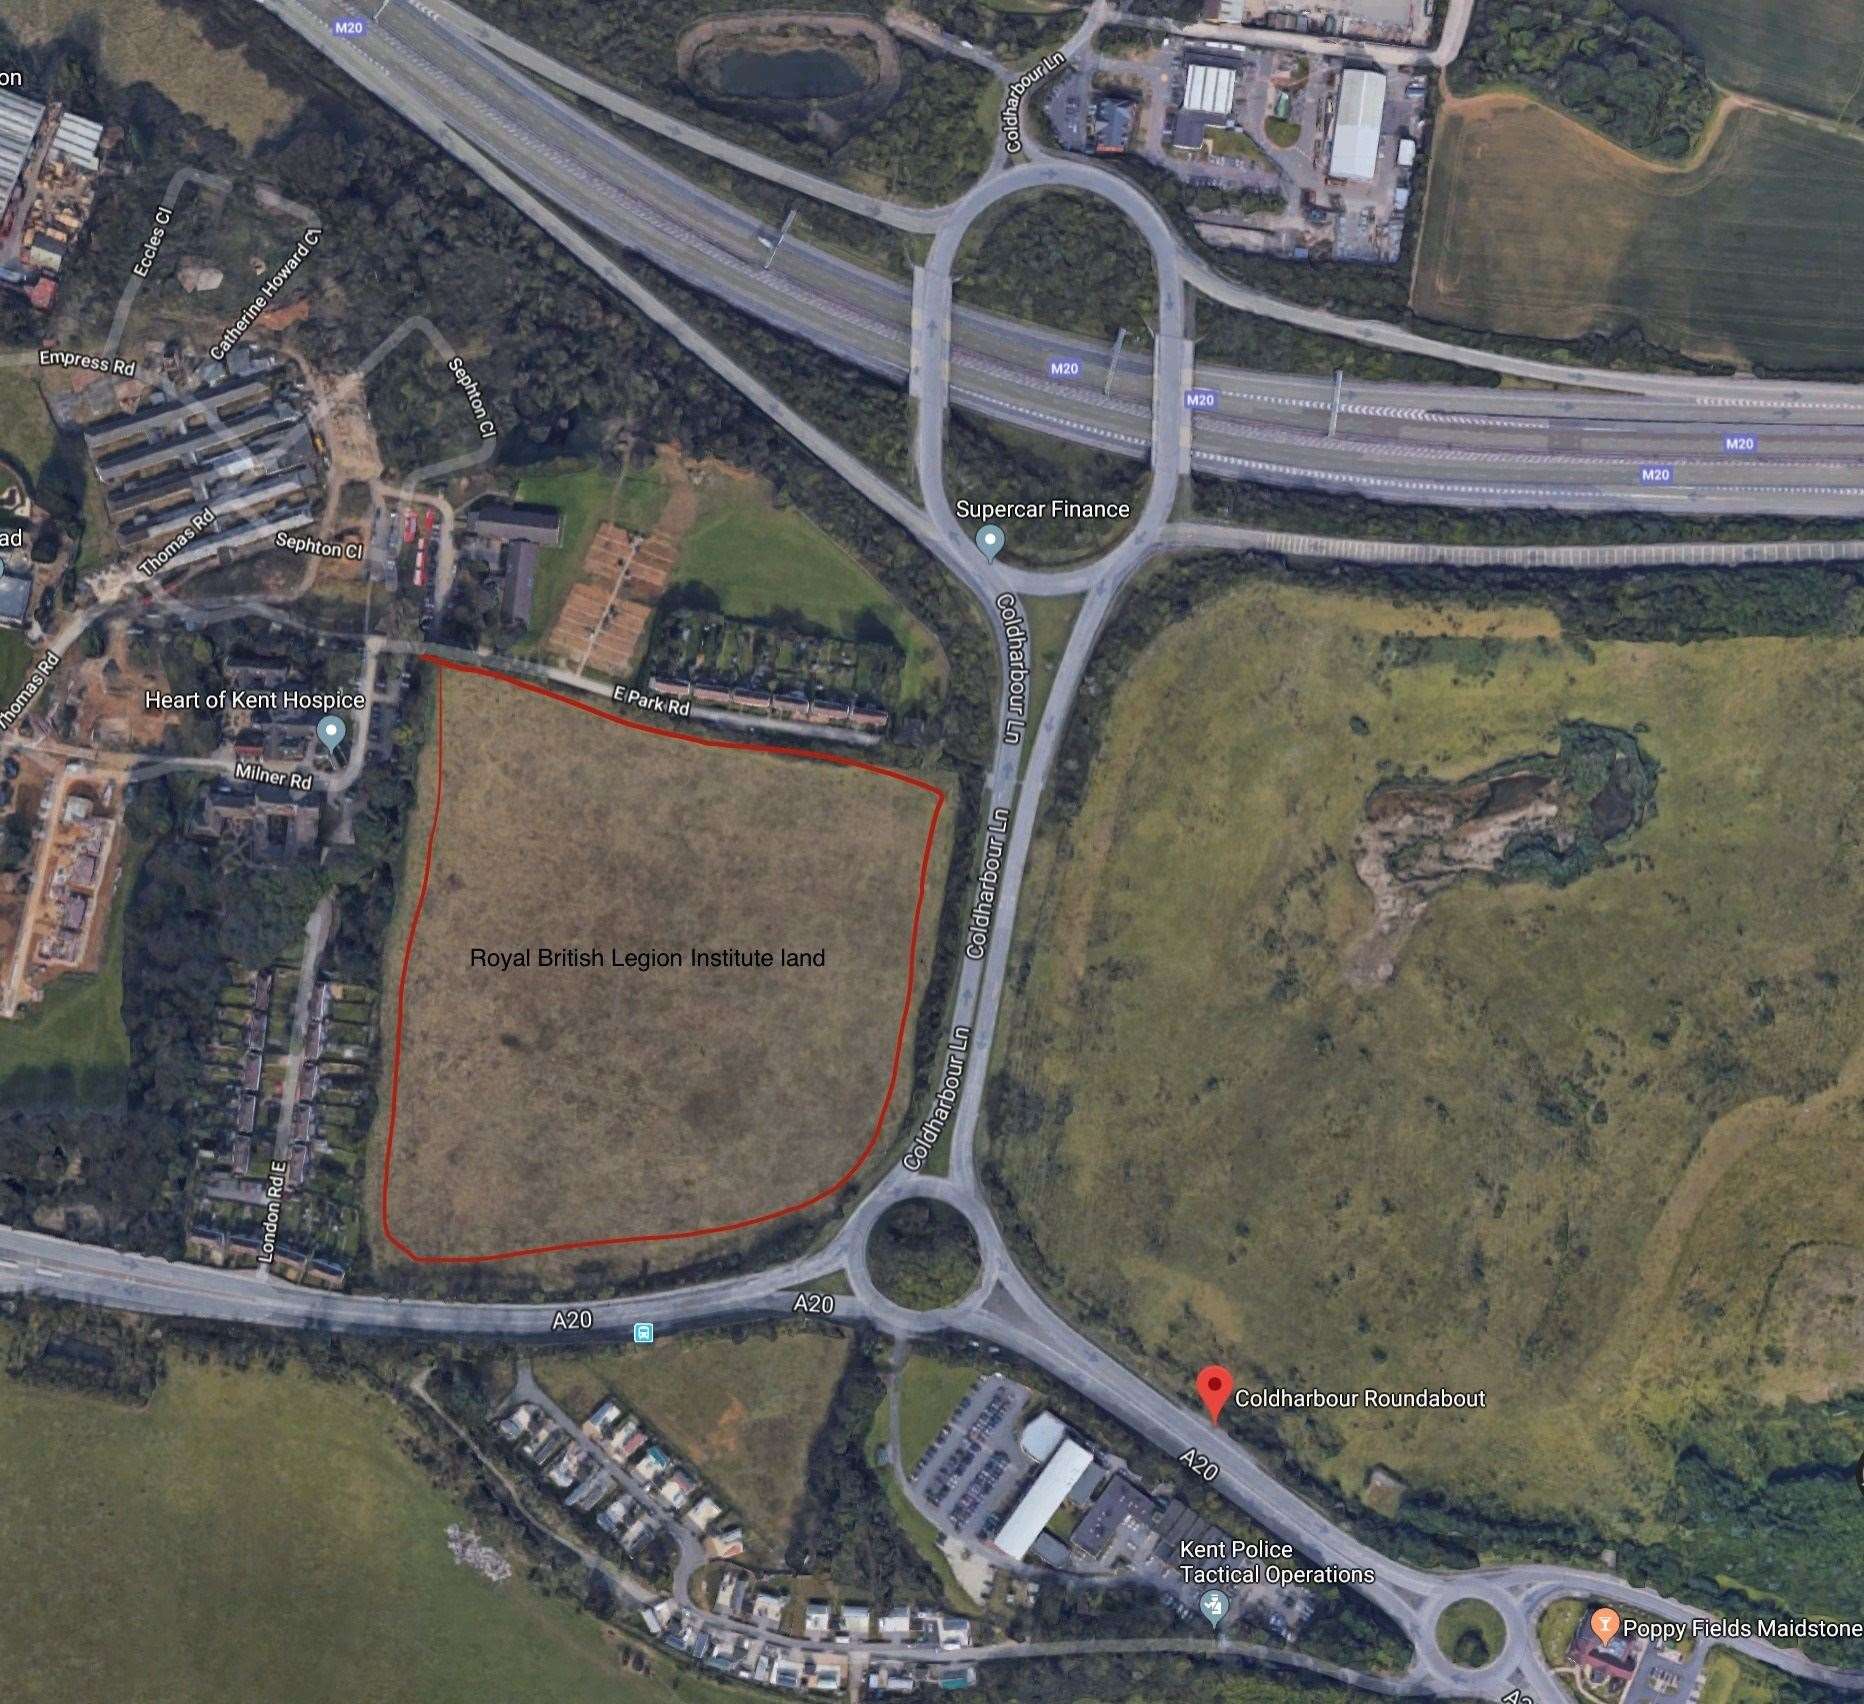 An aerial view of Coldharbour Roundabout on the A20, as it is now